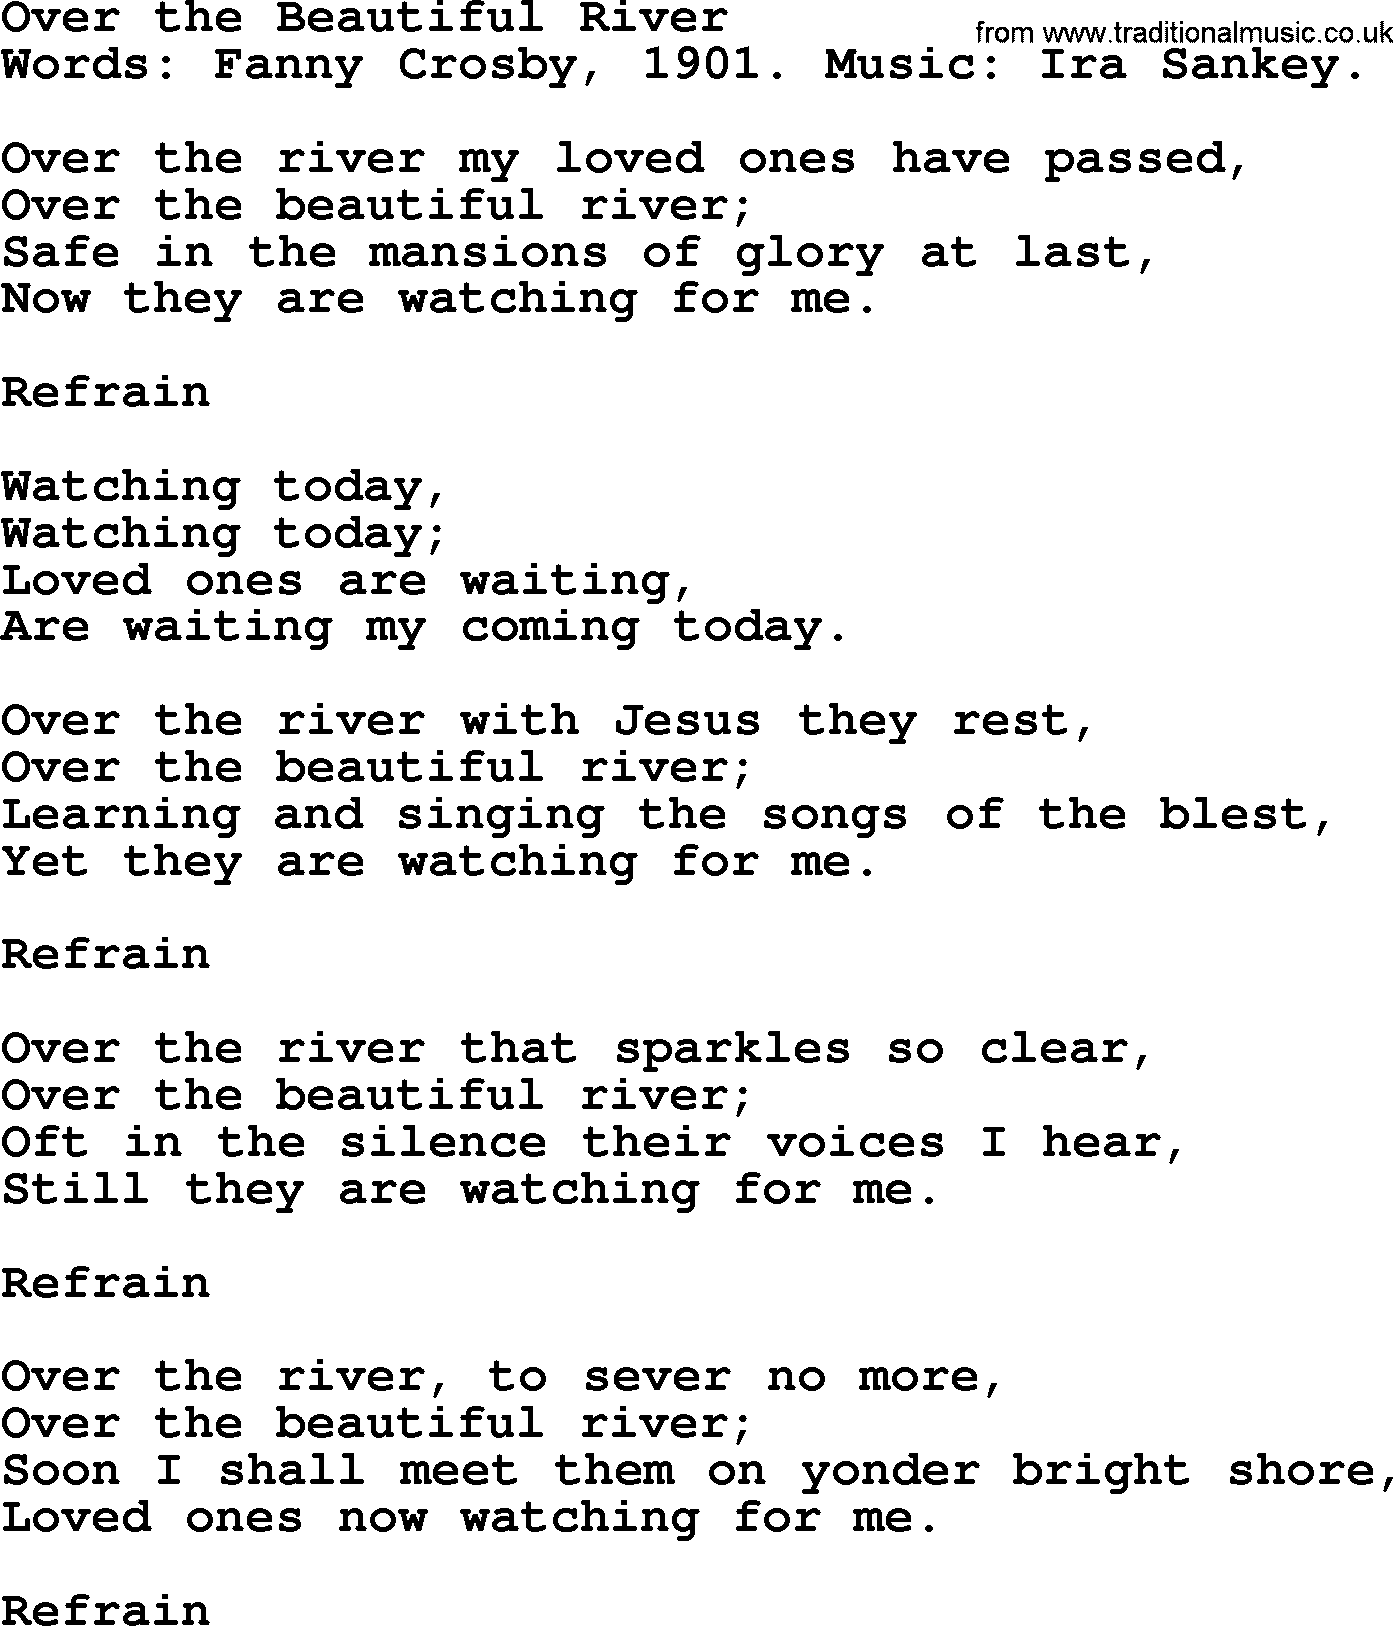 Fanny Crosby song: Over The Beautiful River, lyrics